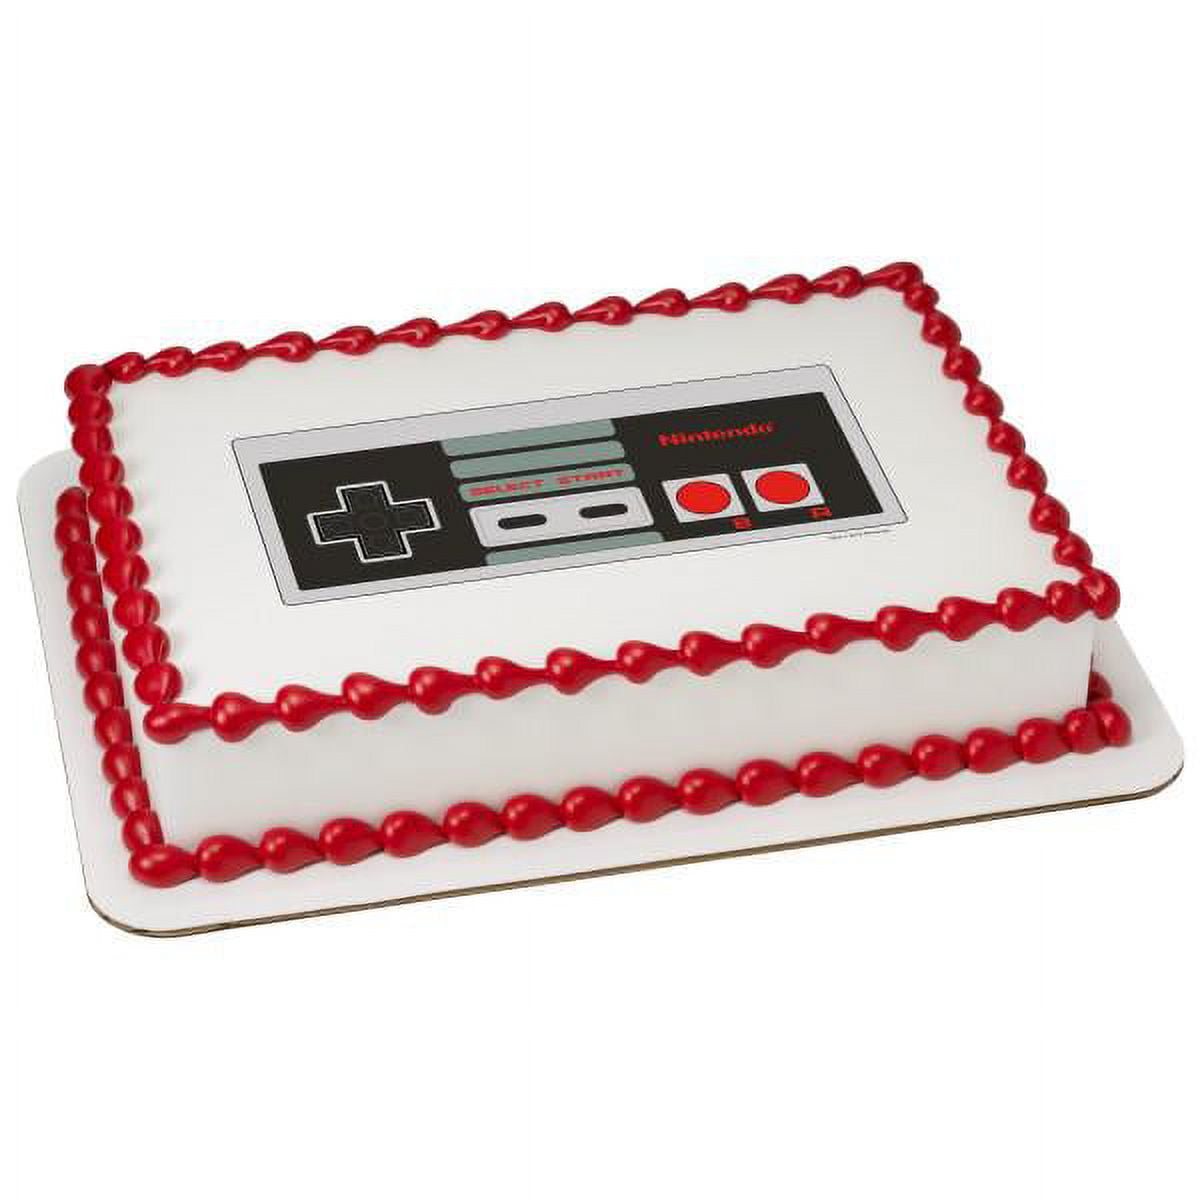 Amazon.com: Cakecery CAKECERY GameOn Gamer Nintendo Playstation Xbox Edible  Cake Image Topper Birthday Cake Banner 1/4 Sheet : Grocery & Gourmet Food